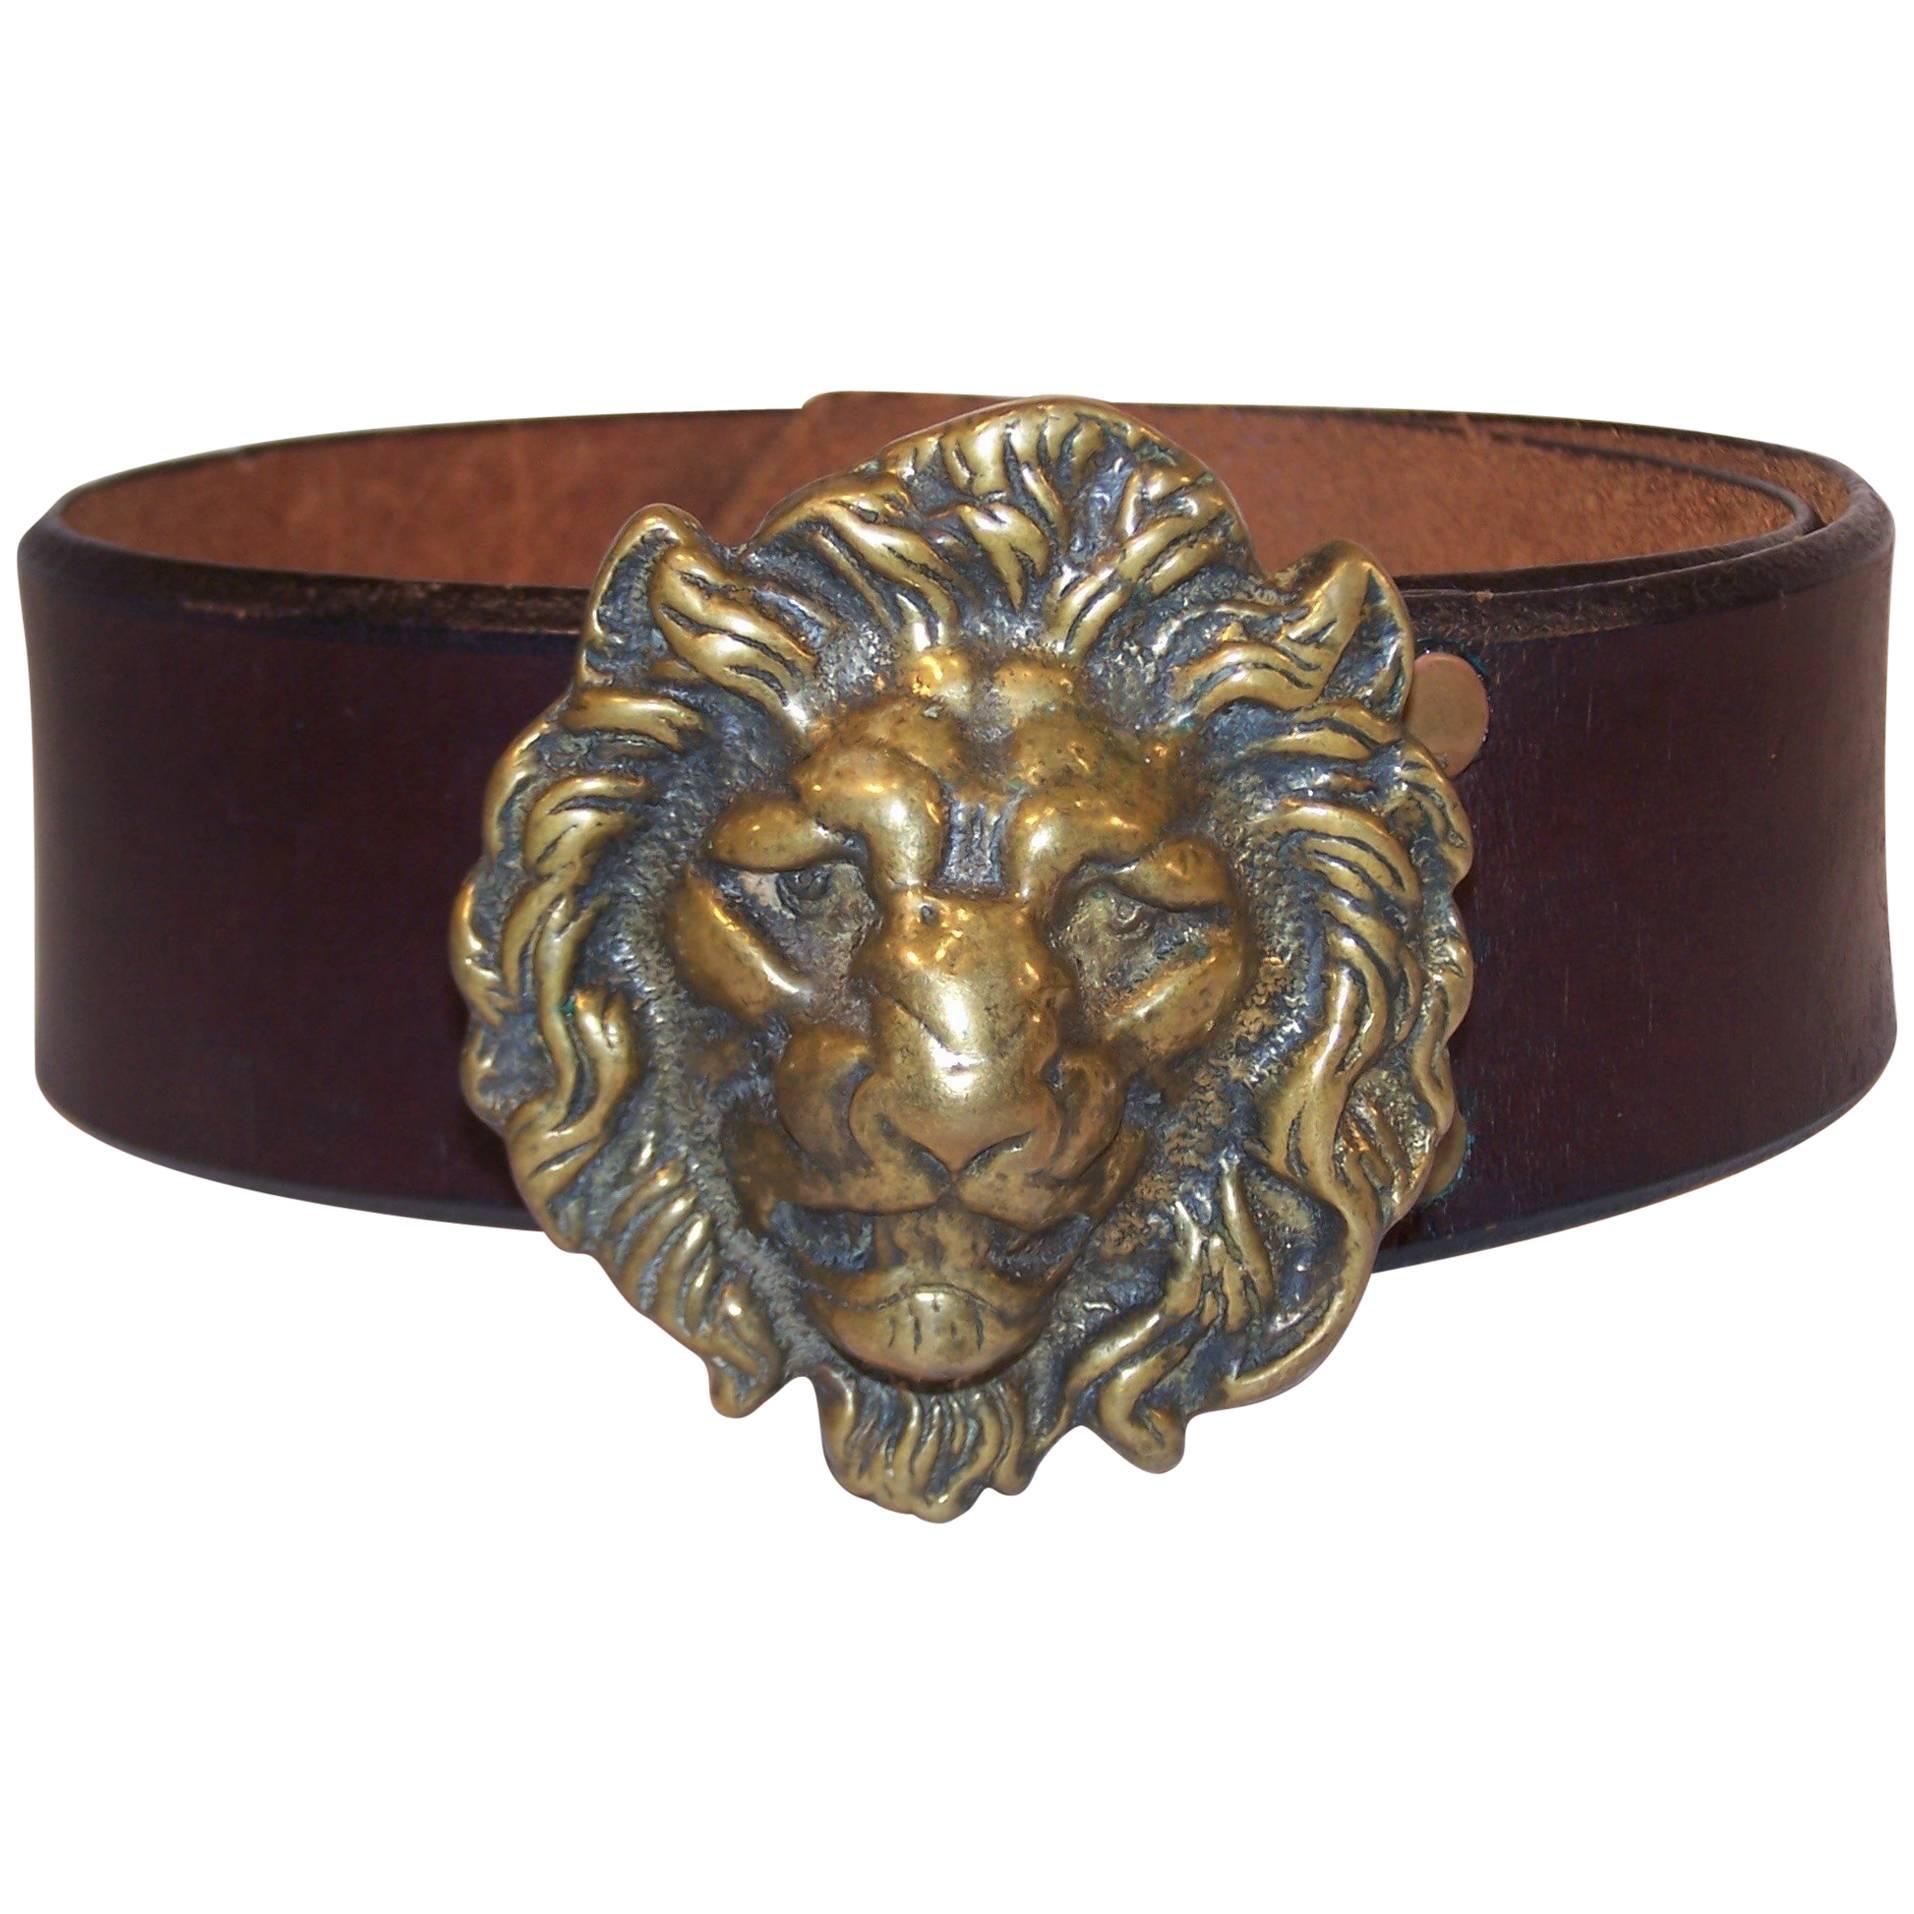 C.1970 Brass Lion & Brown Leather Belt Made in England for Lord & Taylor